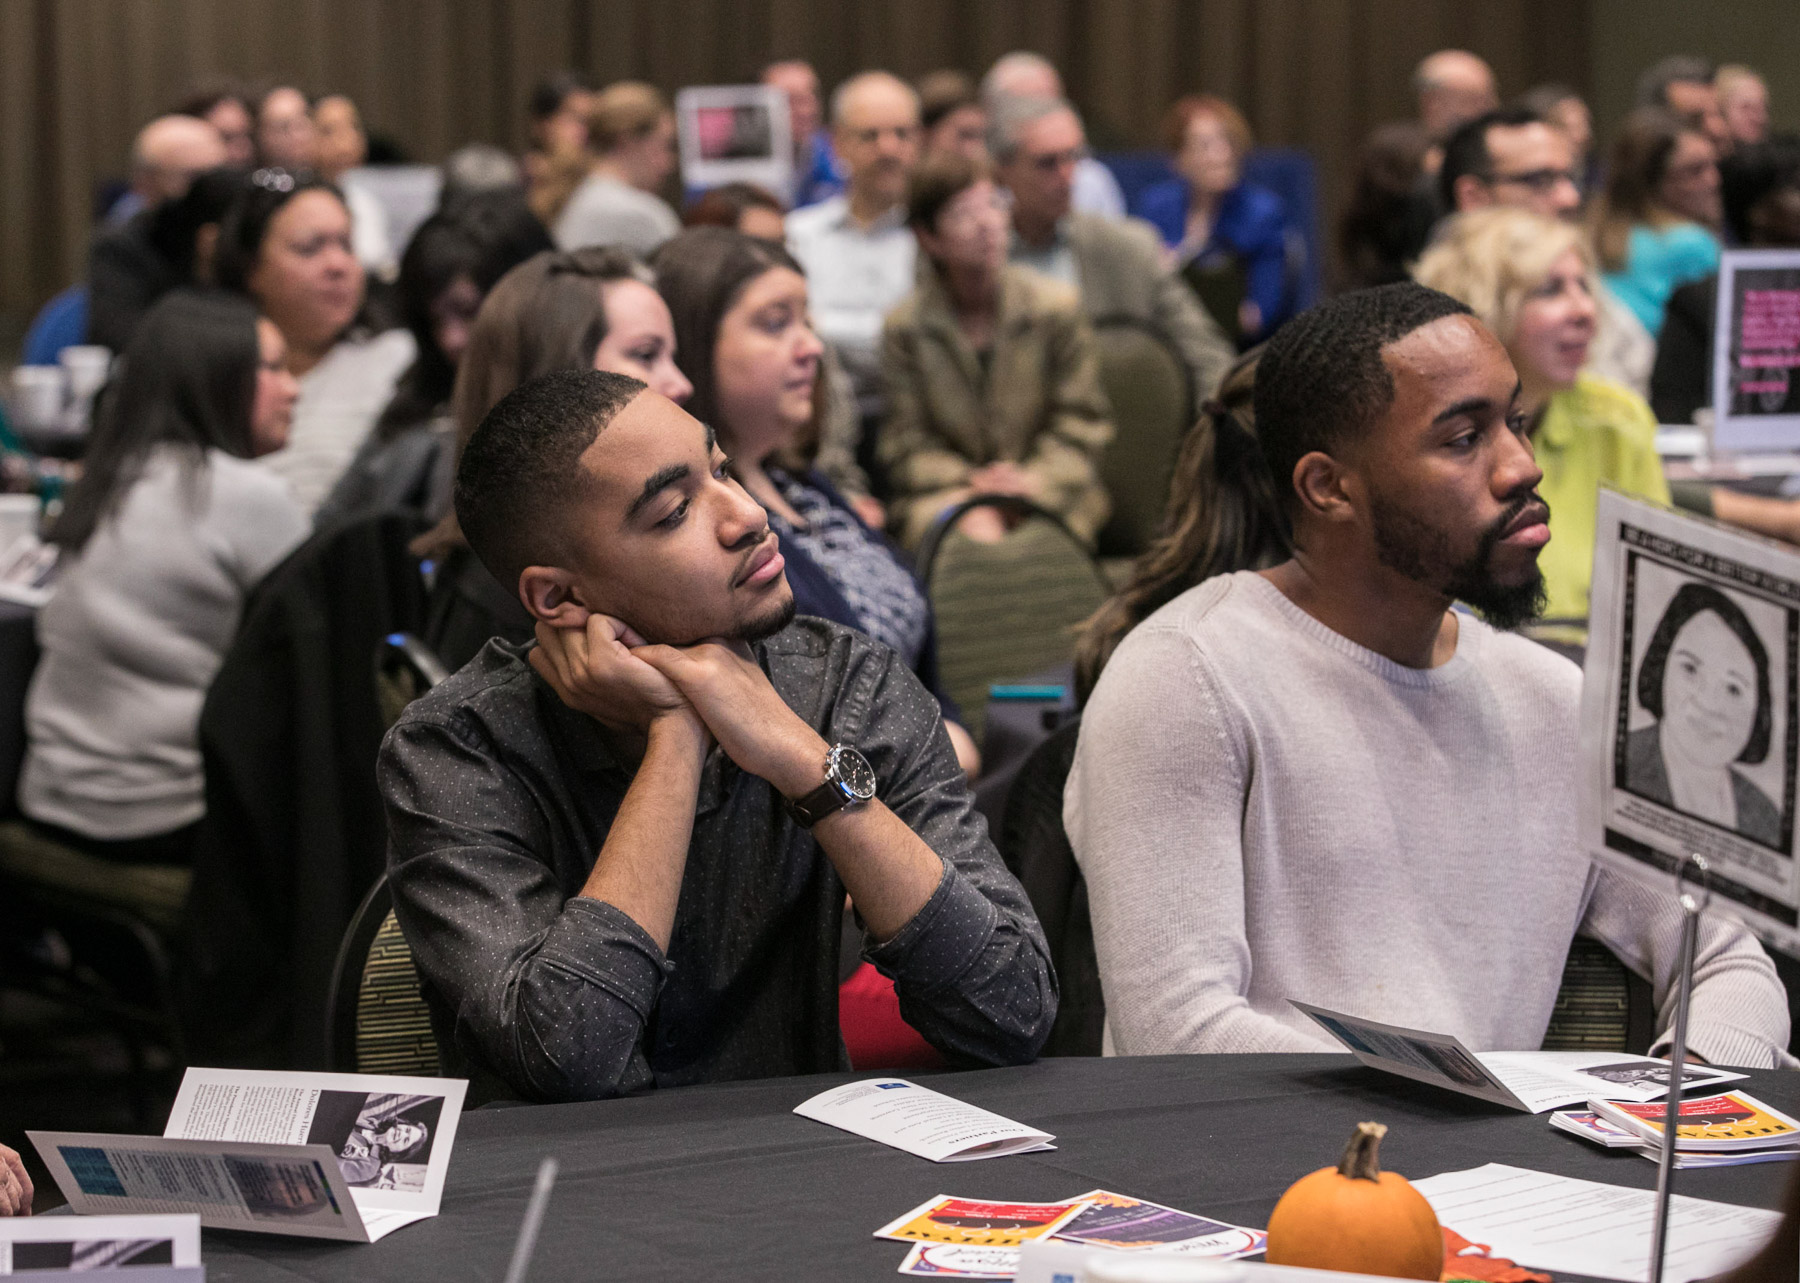 Guests listen as Virginia Martinez talks about her career as an advocate for Latinos, women, children and the poor during her speech at the 2017 Dolores Huerta Prayer Breakfast. (DePaul University/Jamie Moncrief)